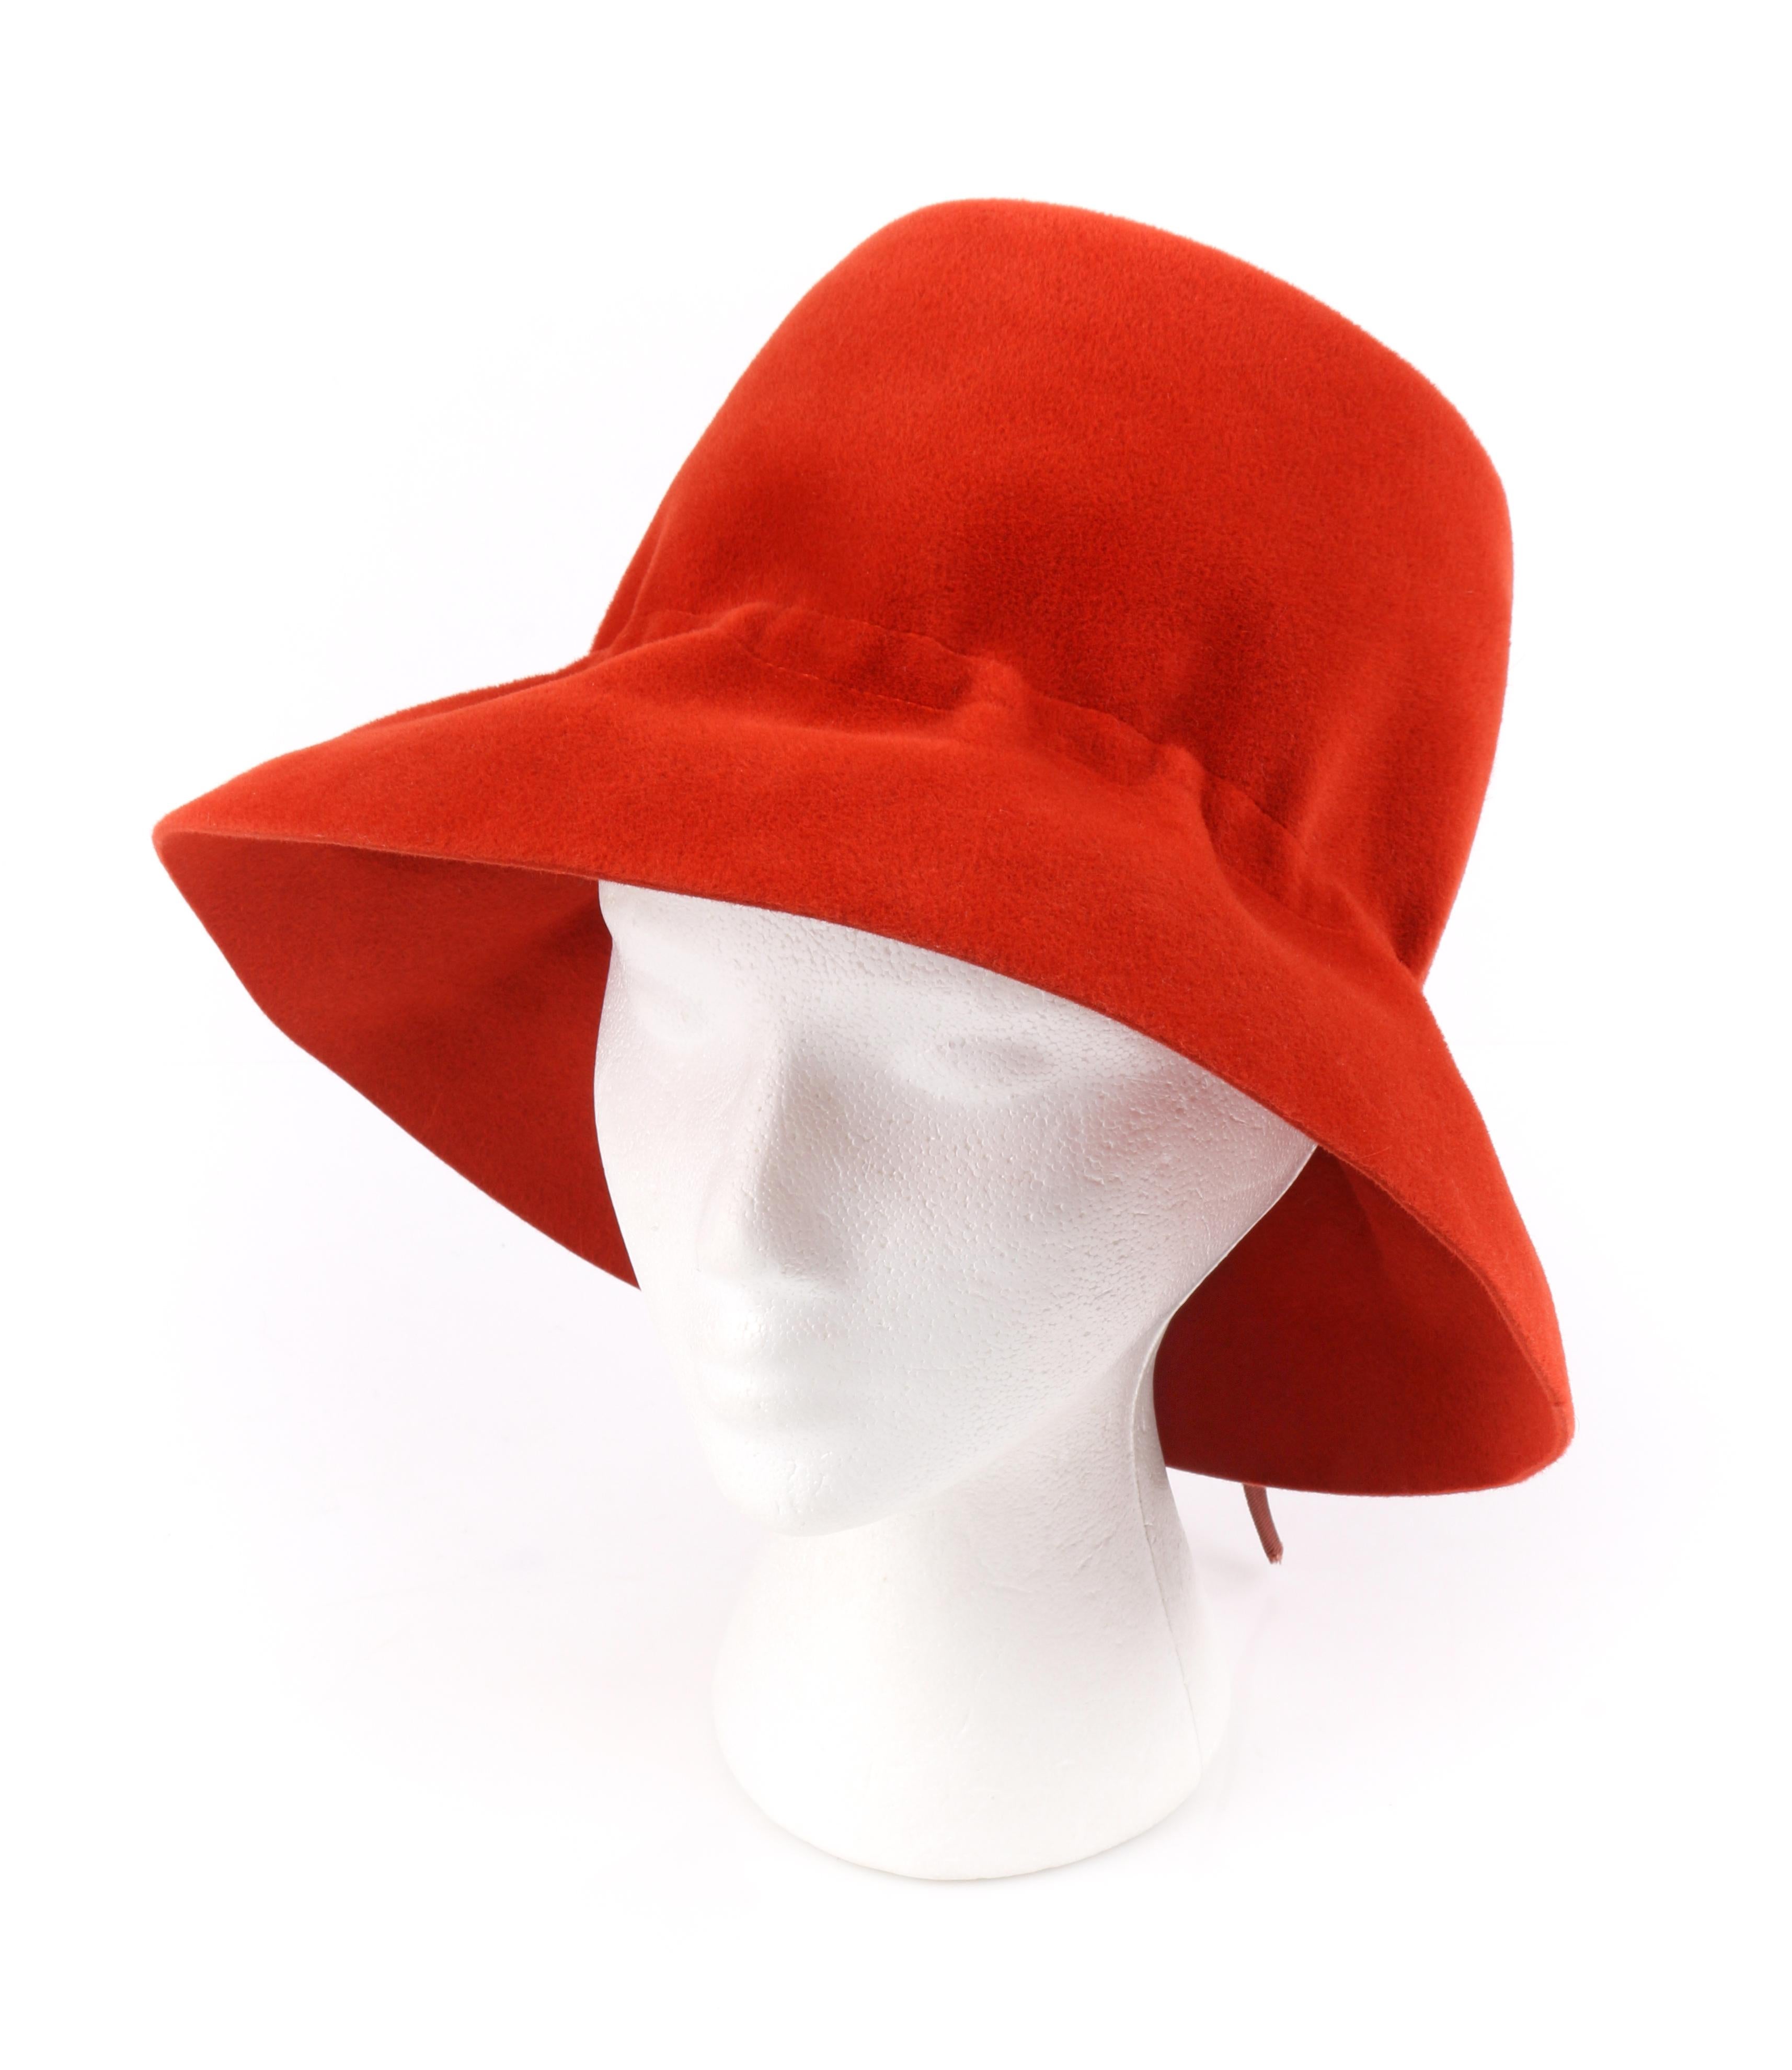 YVES SAINT LAURENT c.1960’s YSL Cayenne Red Felted Fur Structured Bucket Hat
 
Circa: 1960’s
Label(s): Yves Saint Laurent / Paris - New York / Luxuria Imported Body Made In Italy
Style: Bucket Hat
Color(s): Red and brown
Lined: No 
Unmarked Fabric